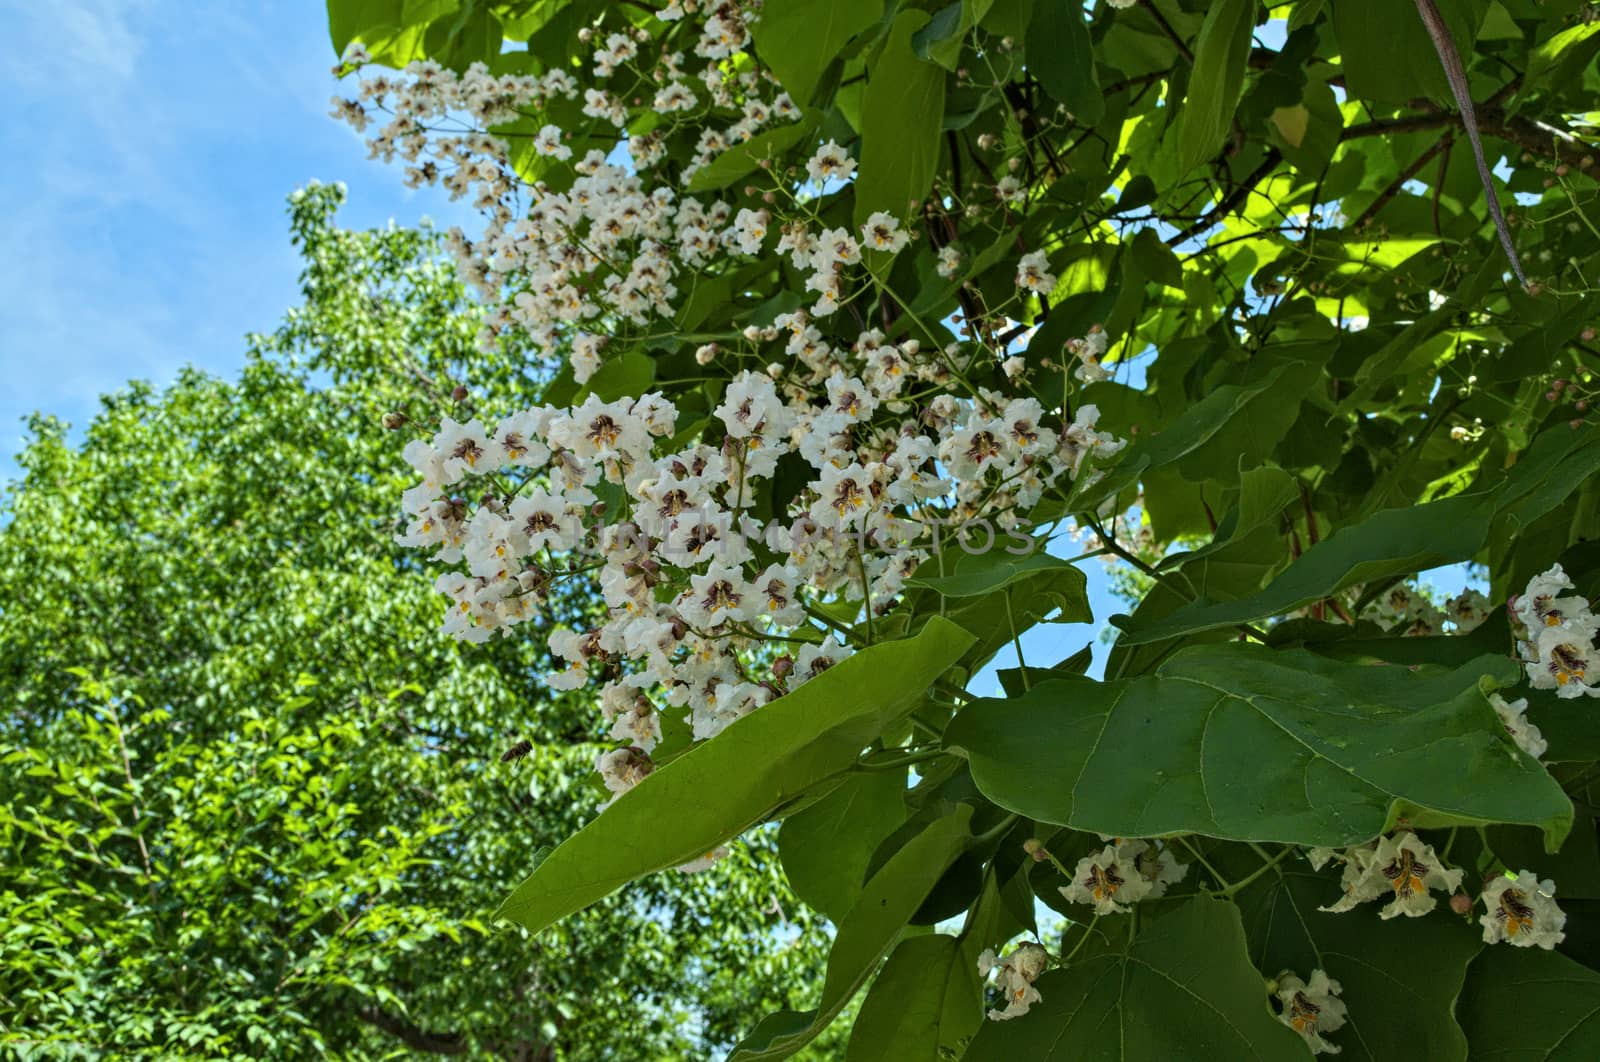 Catalpa tree blooming with big clusters of white flowers by sheriffkule